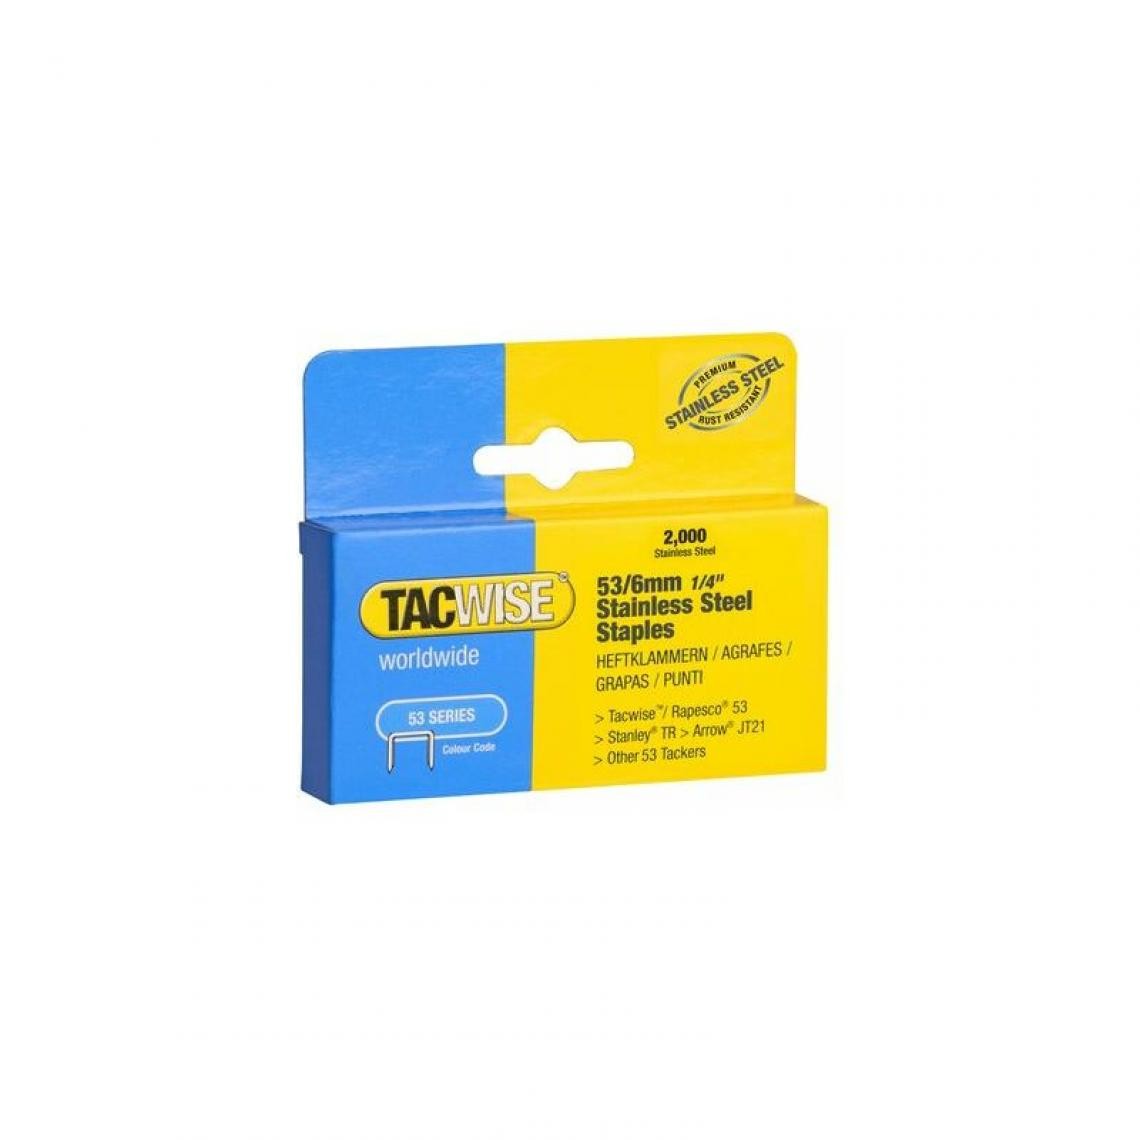 Tacwise - TACWISE Agrafes 53/8 mm, acier inoxydable, 2.000 pièces () - Boulonnerie